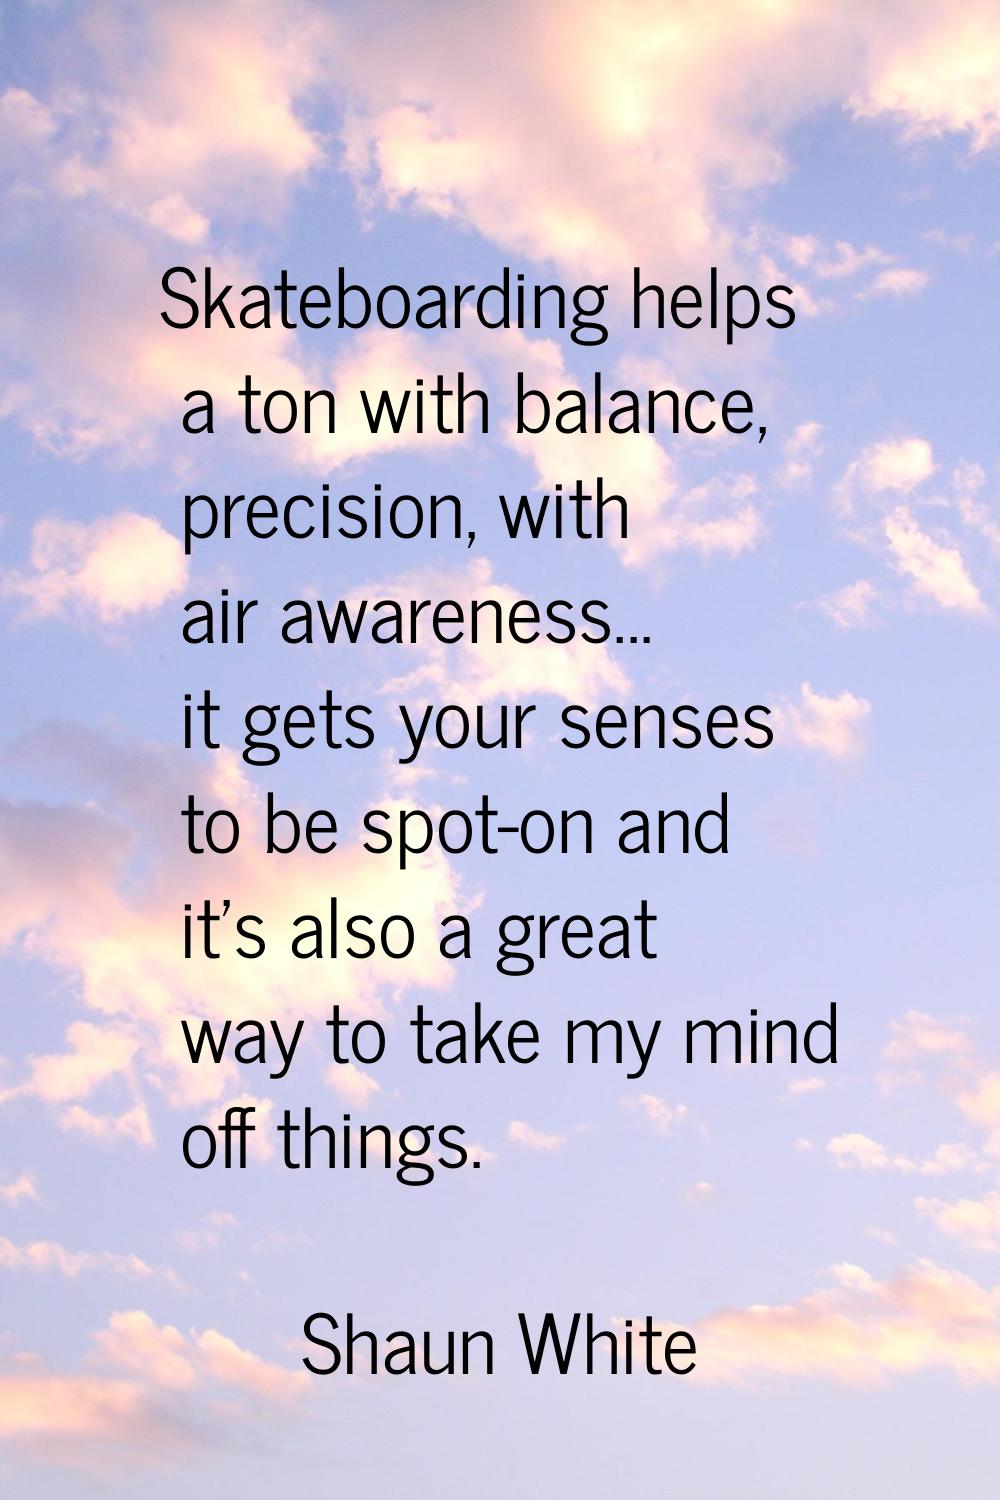 Skateboarding helps a ton with balance, precision, with air awareness... it gets your senses to be 